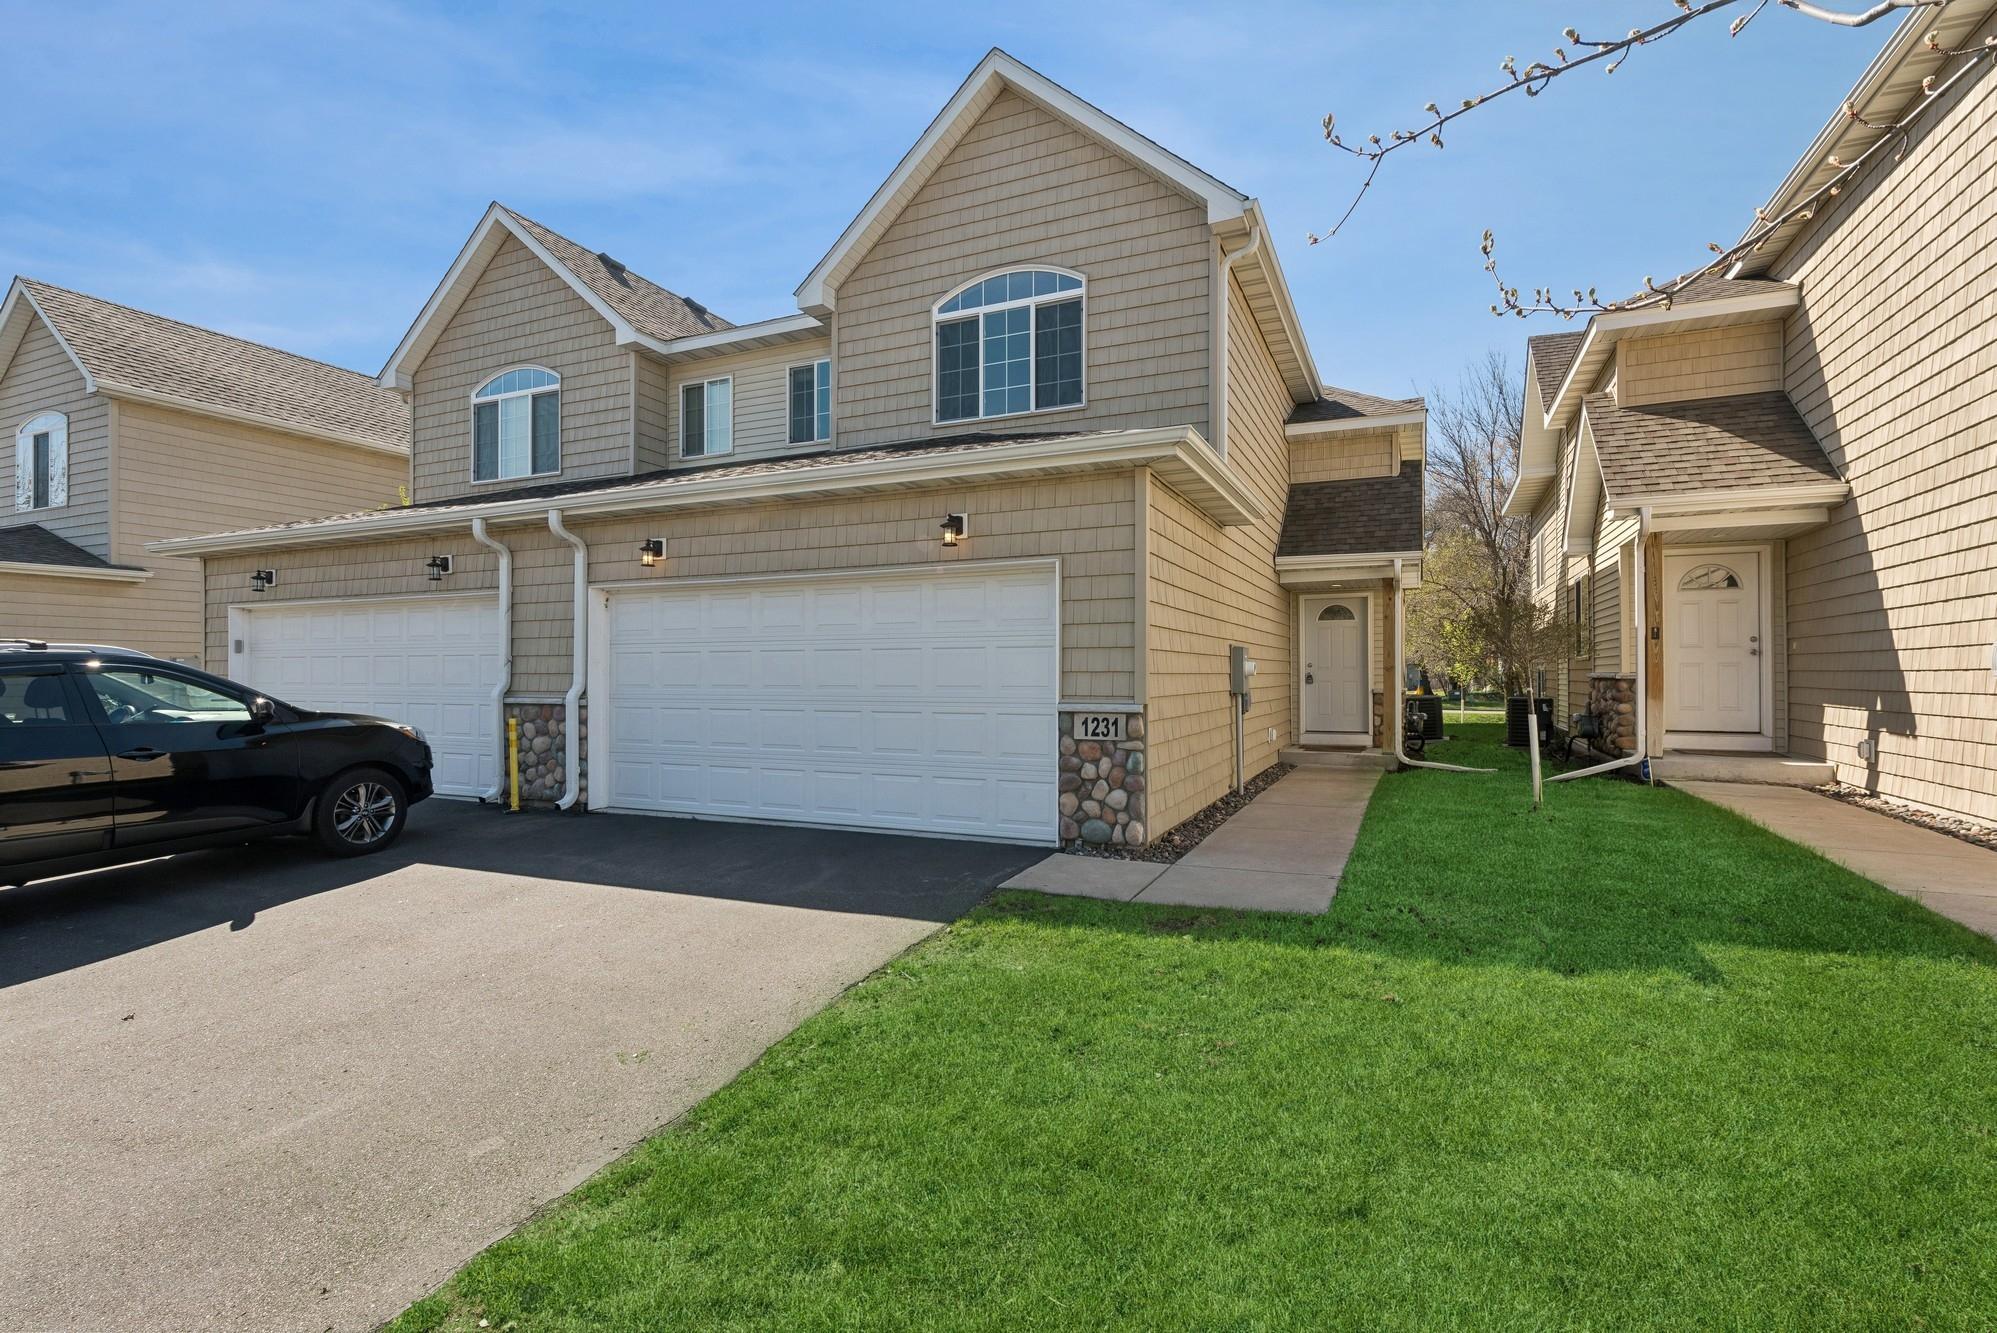 Wonderful curb appeal here. You will be proud to have your guests pull into your driveway!